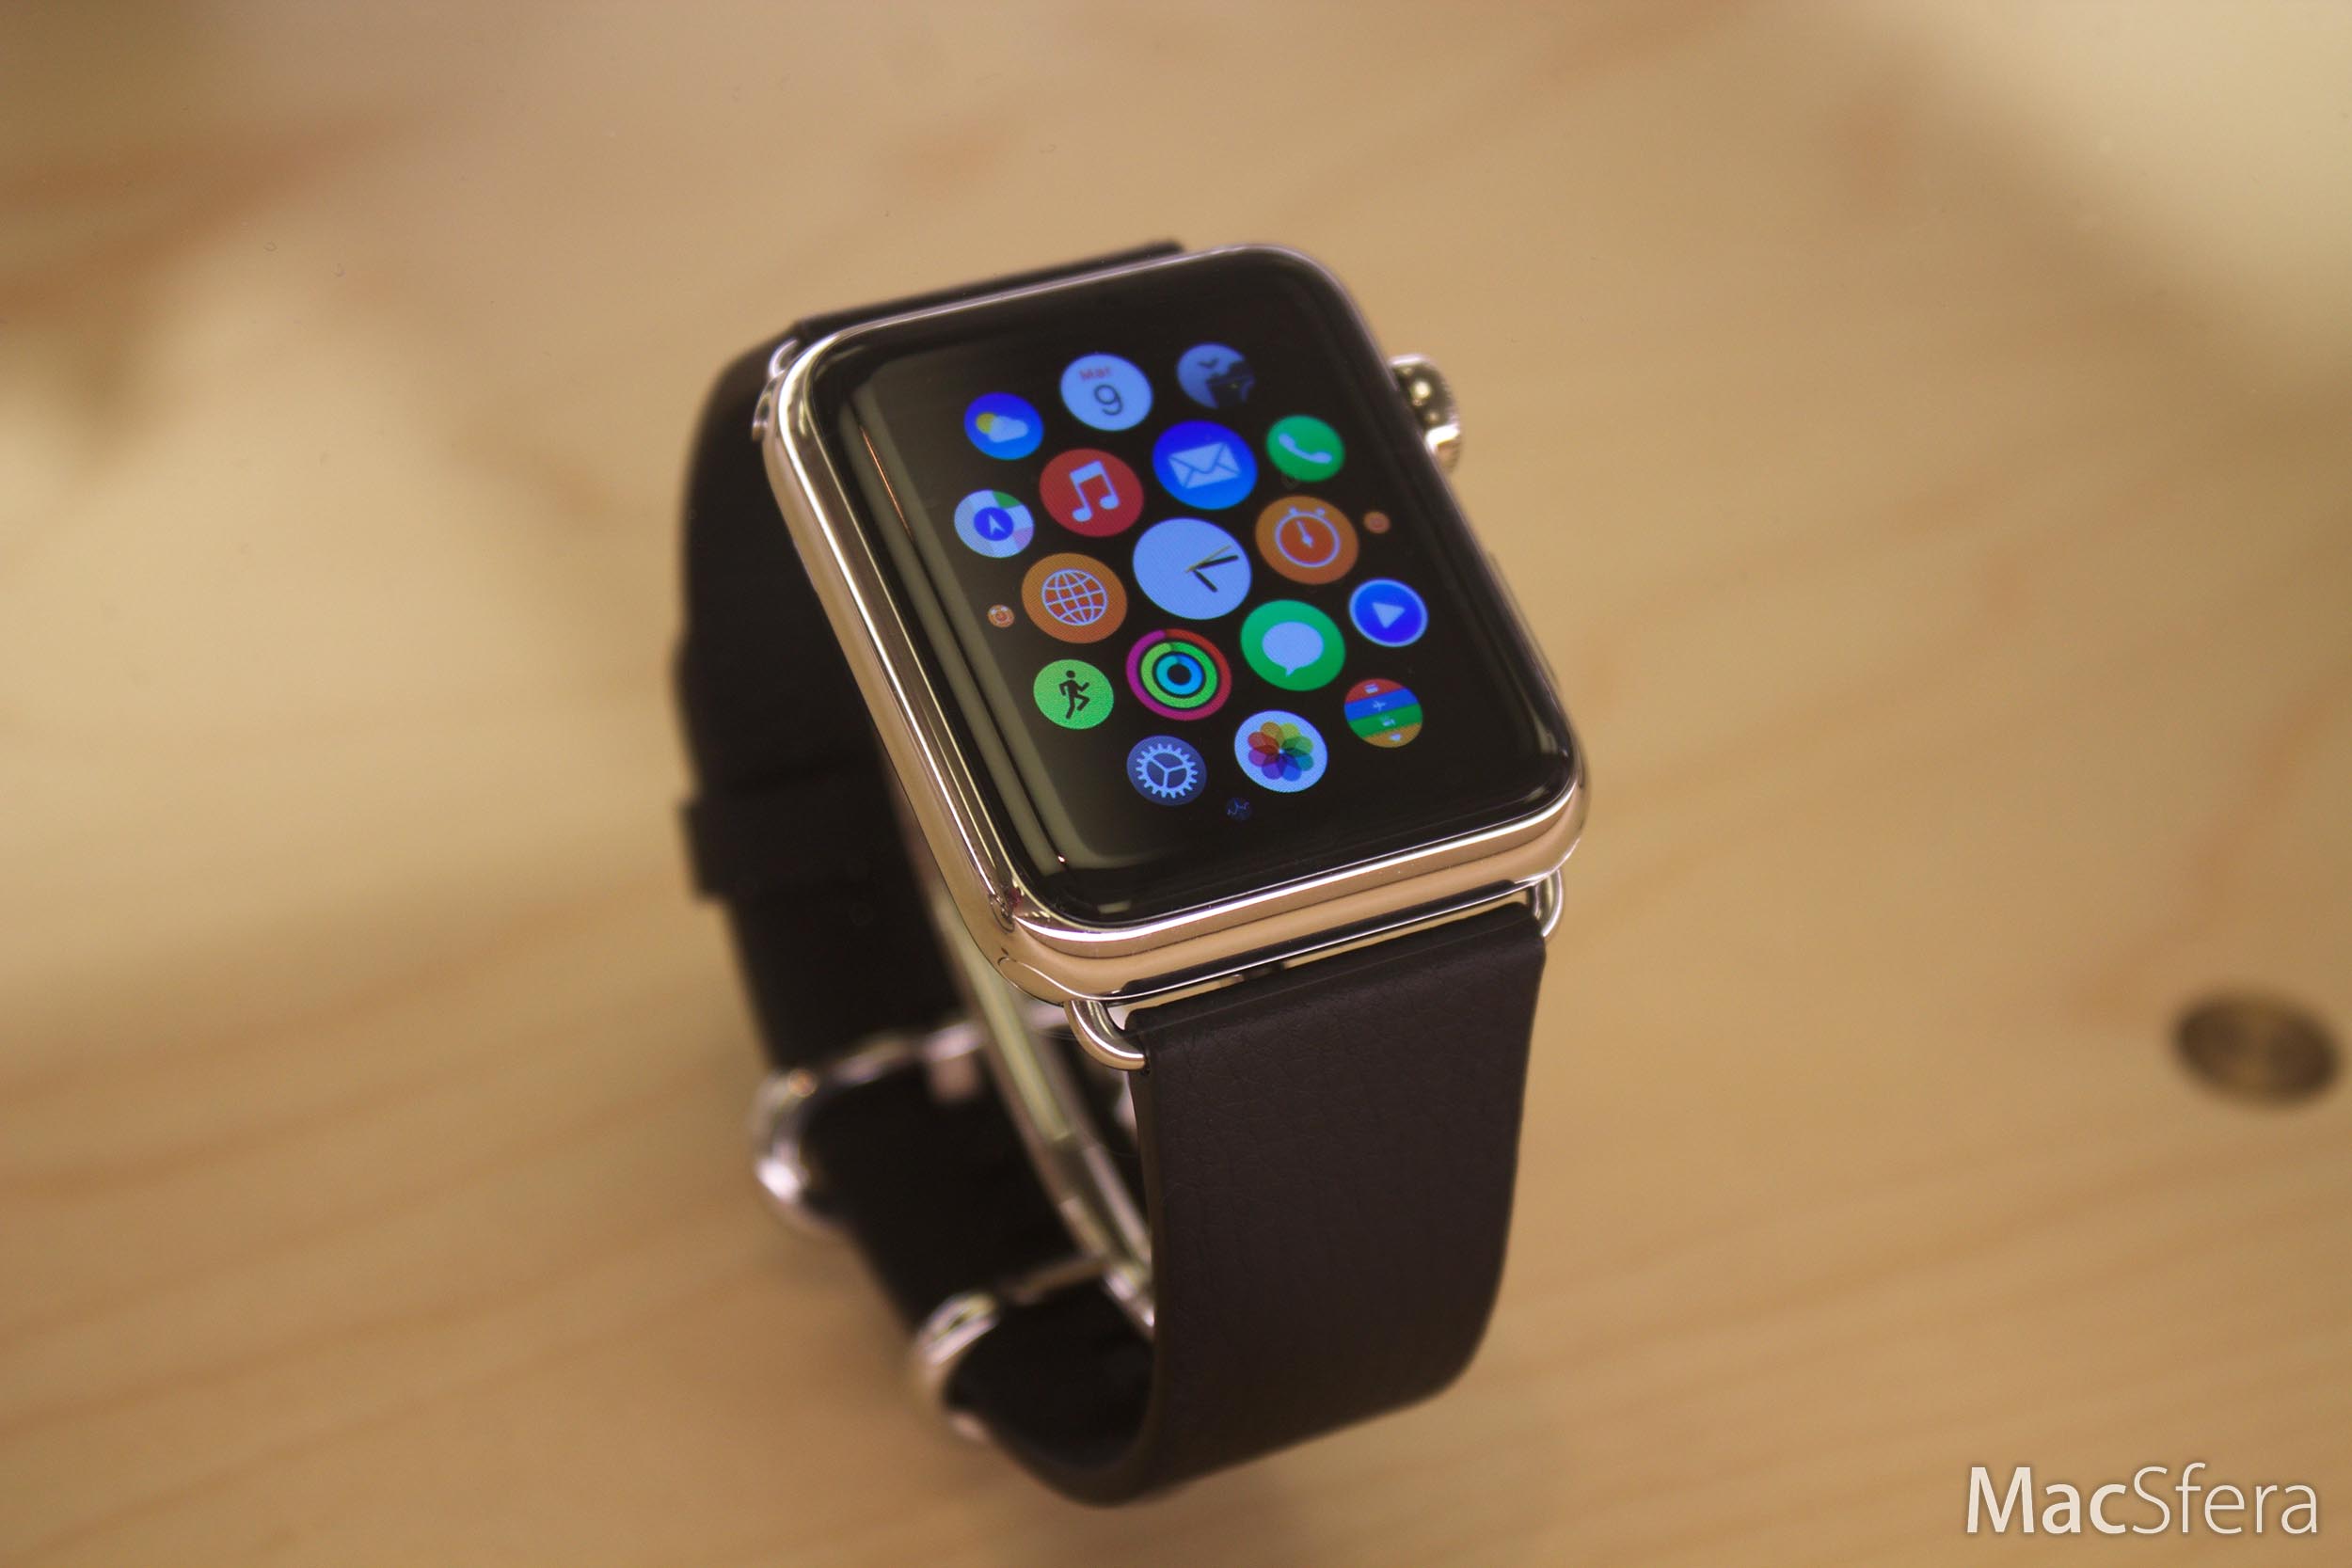 Apple Watch Stainless Steel